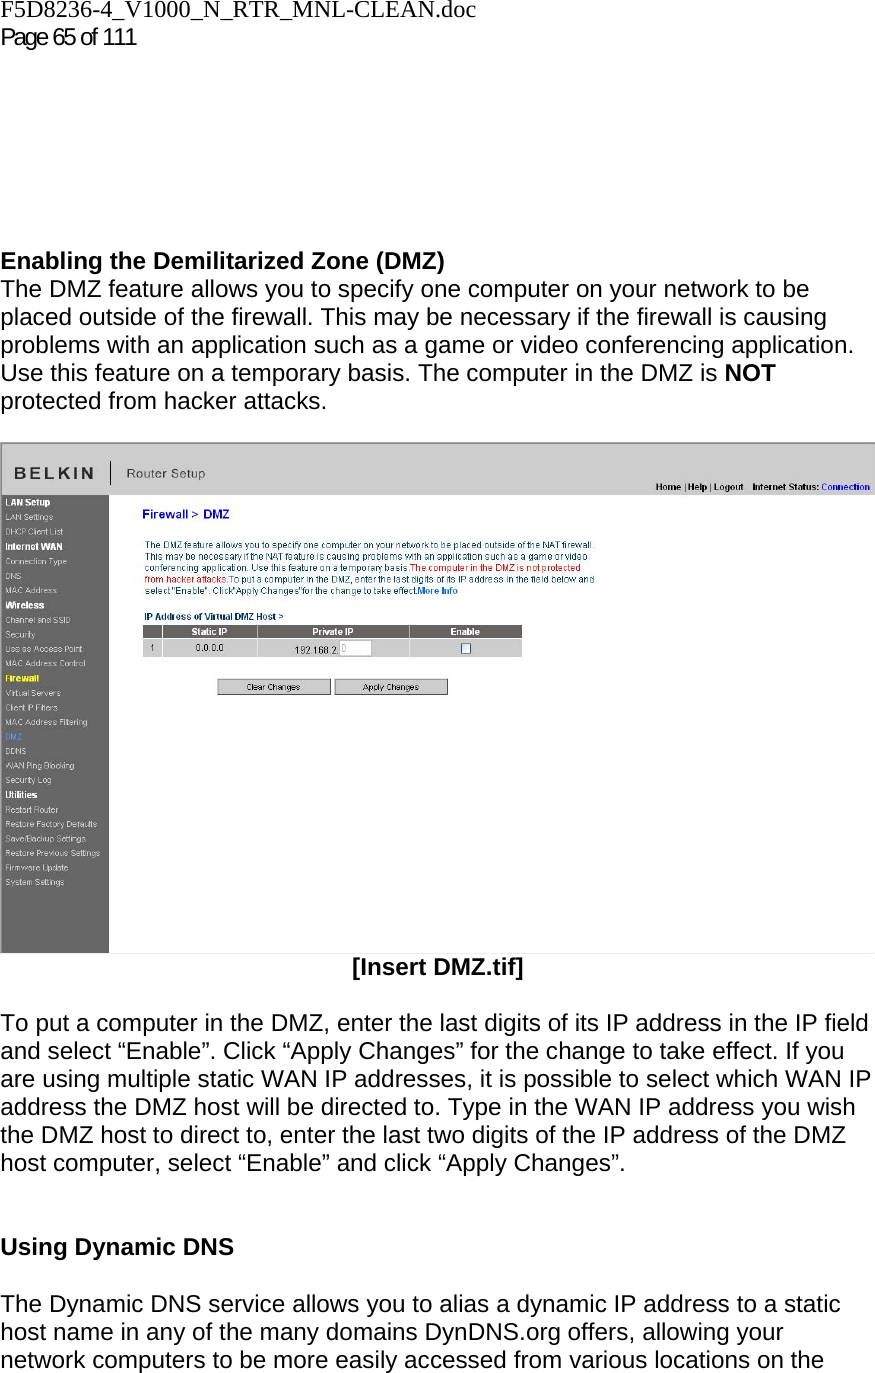 F5D8236-4_V1000_N_RTR_MNL-CLEAN.doc  Page 65 of 111         Enabling the Demilitarized Zone (DMZ)  The DMZ feature allows you to specify one computer on your network to be placed outside of the firewall. This may be necessary if the firewall is causing problems with an application such as a game or video conferencing application. Use this feature on a temporary basis. The computer in the DMZ is NOT protected from hacker attacks.    [Insert DMZ.tif]  To put a computer in the DMZ, enter the last digits of its IP address in the IP field and select “Enable”. Click “Apply Changes” for the change to take effect. If you are using multiple static WAN IP addresses, it is possible to select which WAN IP address the DMZ host will be directed to. Type in the WAN IP address you wish the DMZ host to direct to, enter the last two digits of the IP address of the DMZ host computer, select “Enable” and click “Apply Changes”.   Using Dynamic DNS  The Dynamic DNS service allows you to alias a dynamic IP address to a static host name in any of the many domains DynDNS.org offers, allowing your network computers to be more easily accessed from various locations on the 